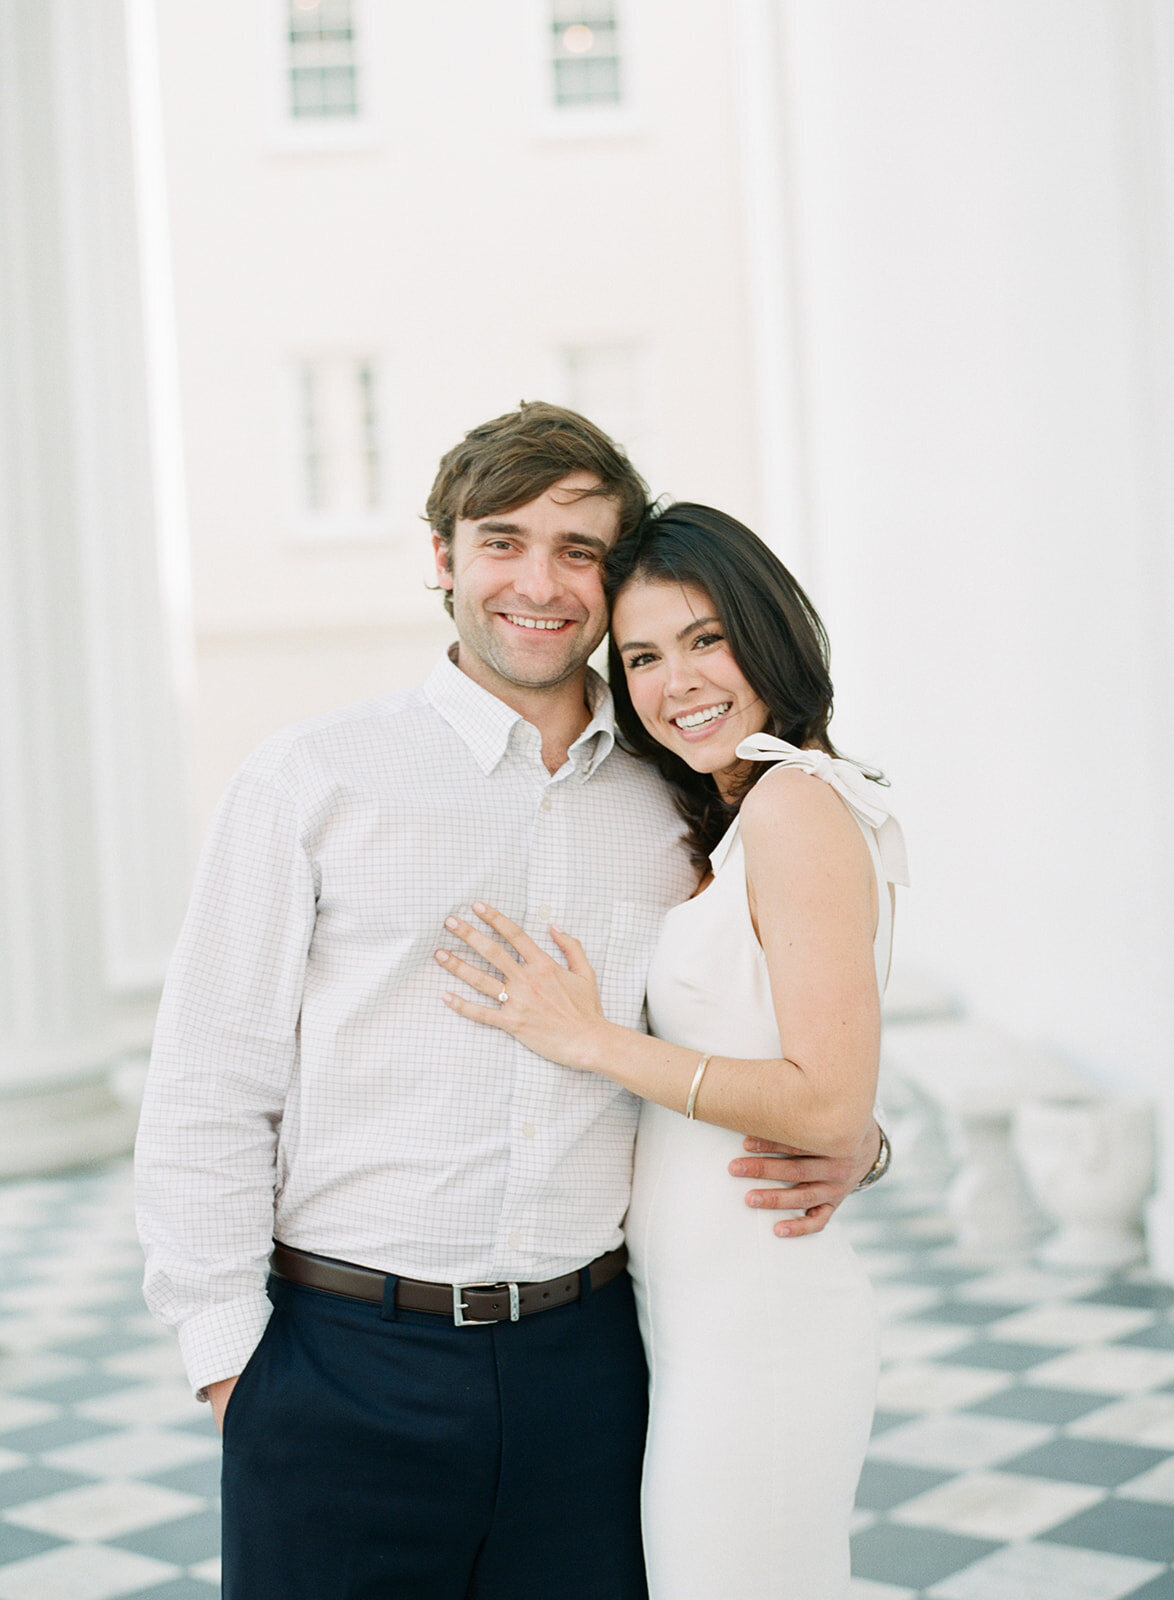 FILM_downtown_charleston_engagement_checkerboard_floor_white_dress_outdoor_wedding_photographer_kailee_dimeglio_photography-28_websize